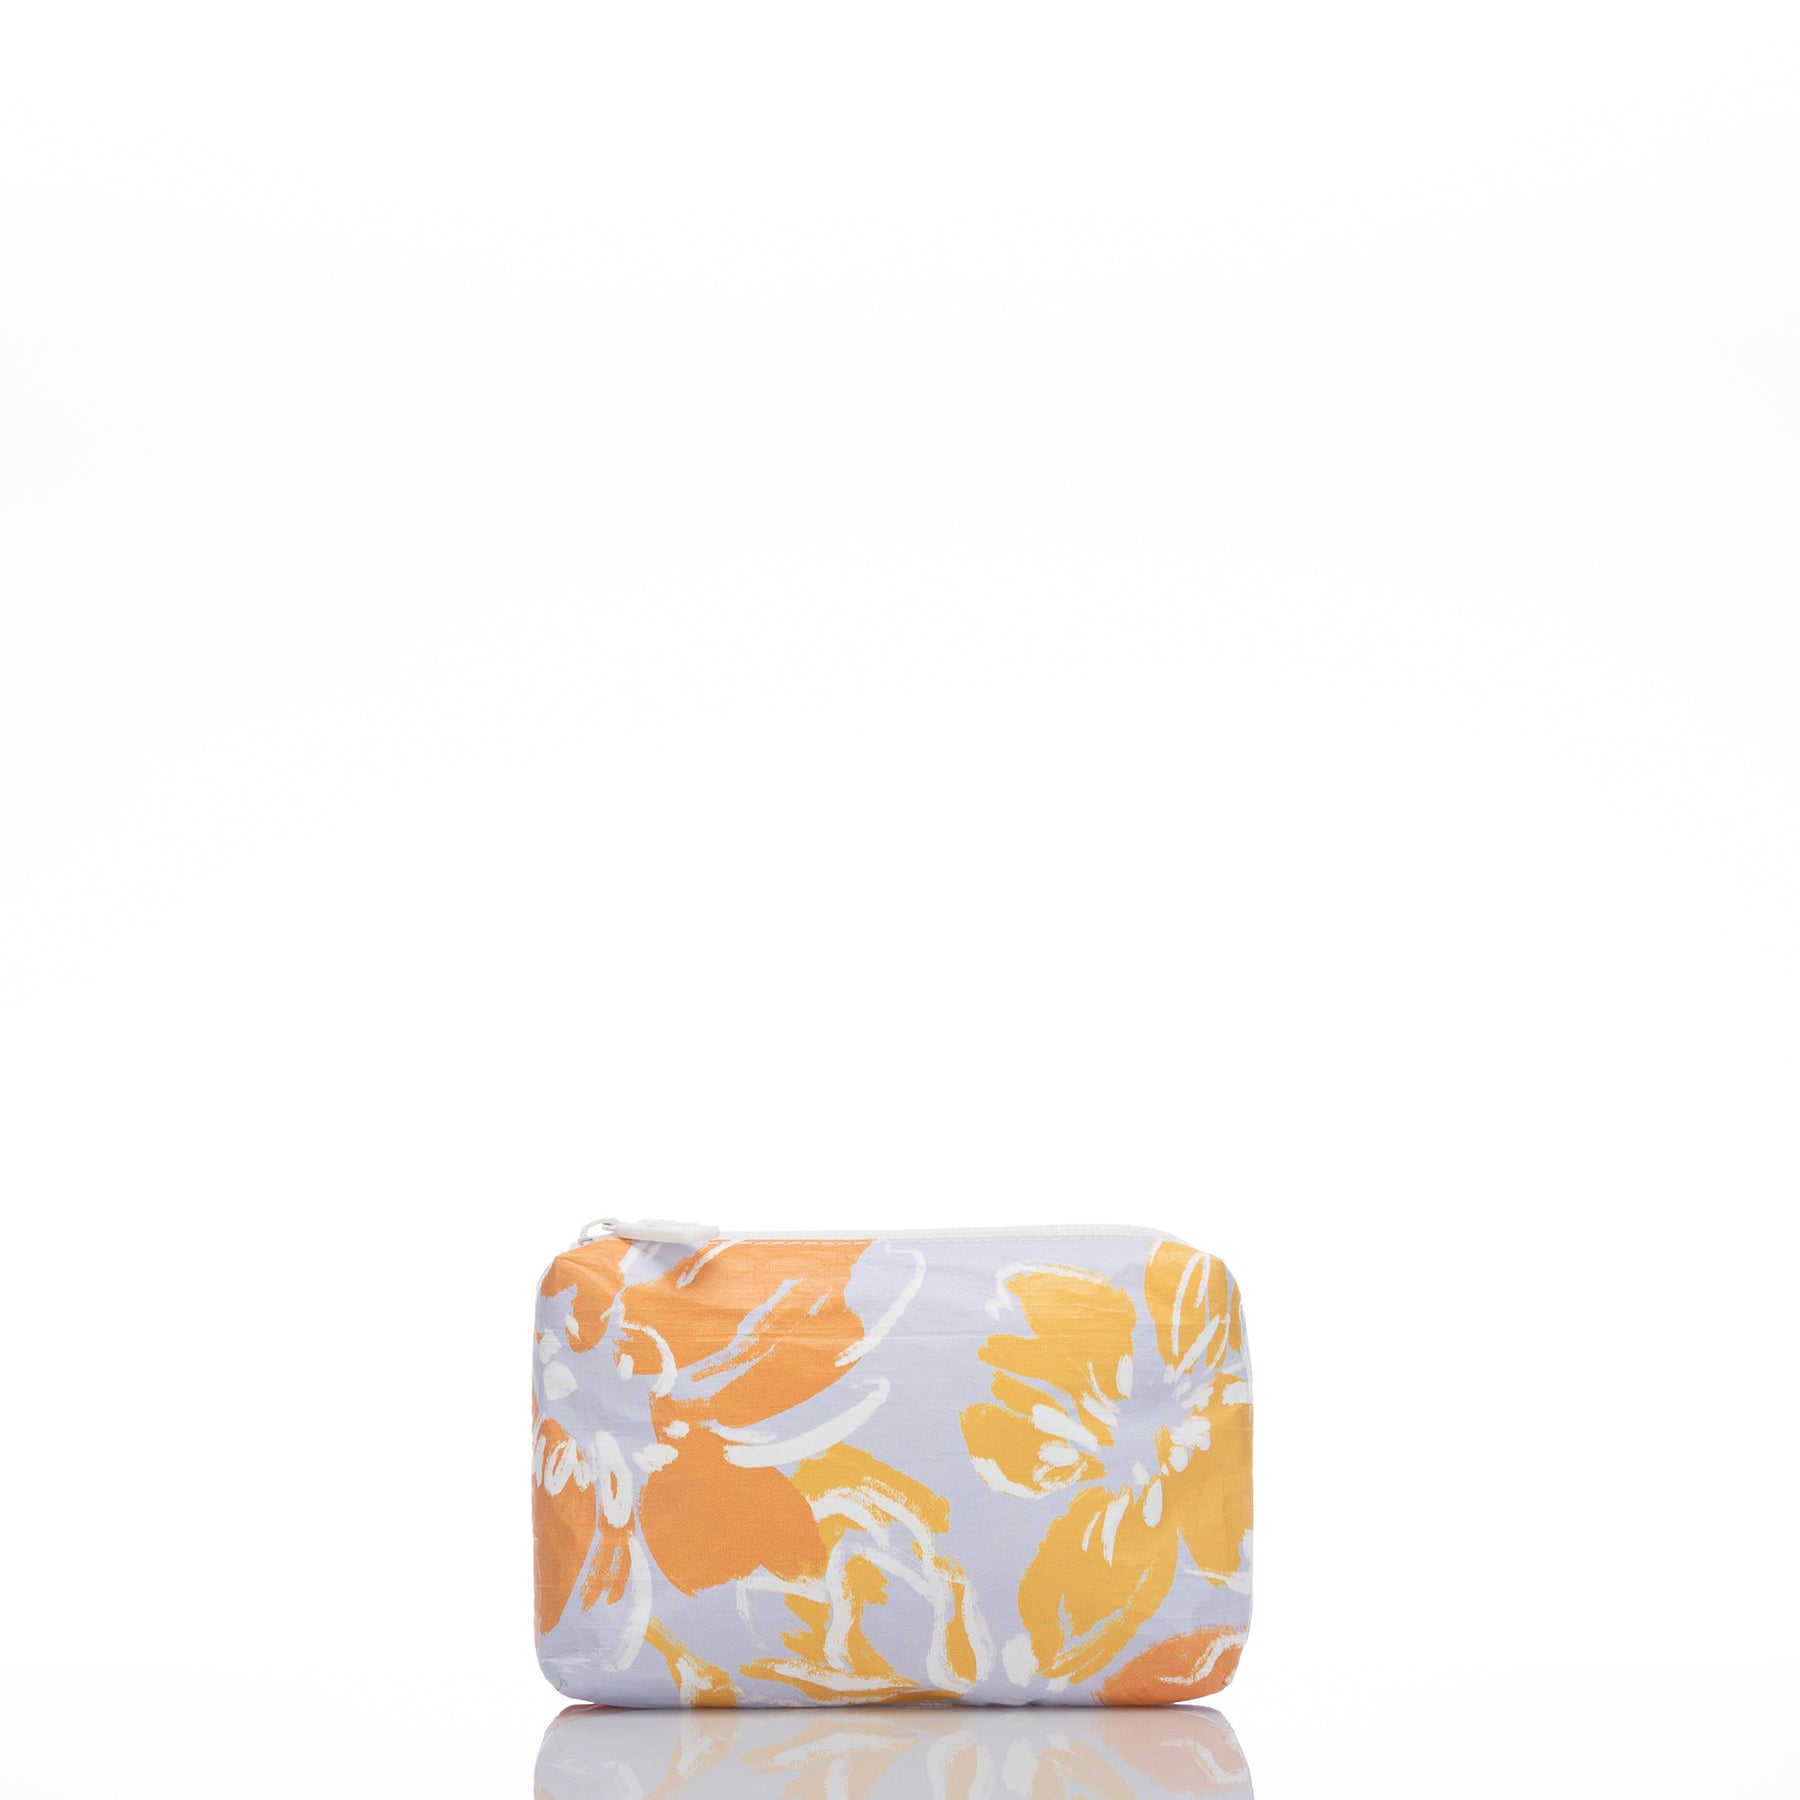 TGATW x ALOHA Collection Mini Pouch – The Girl and The Water